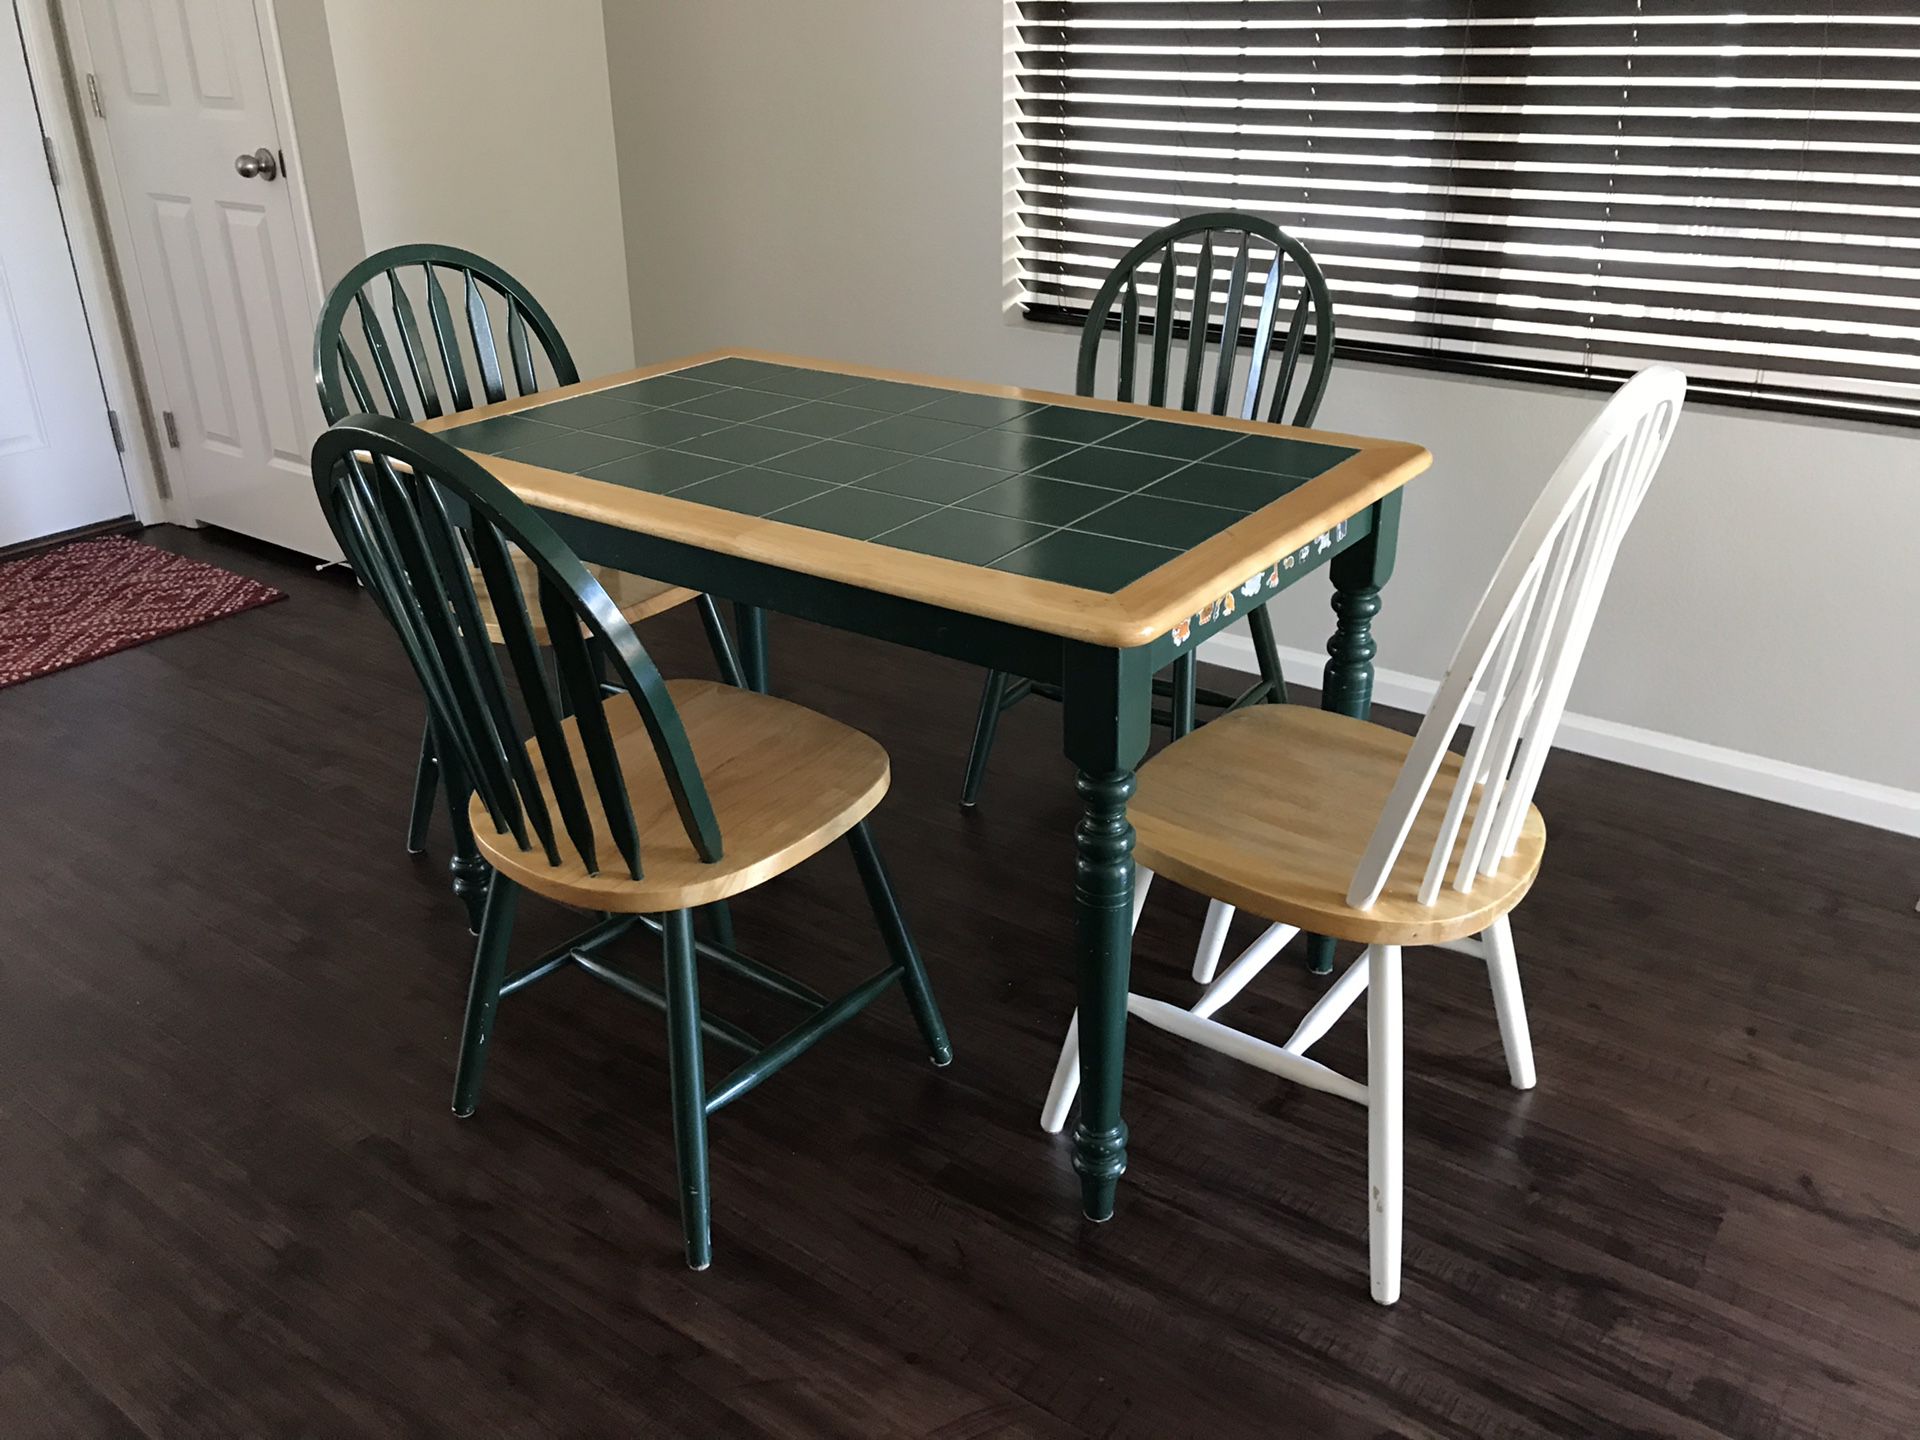 Wooden Dining table with 4 Chairs